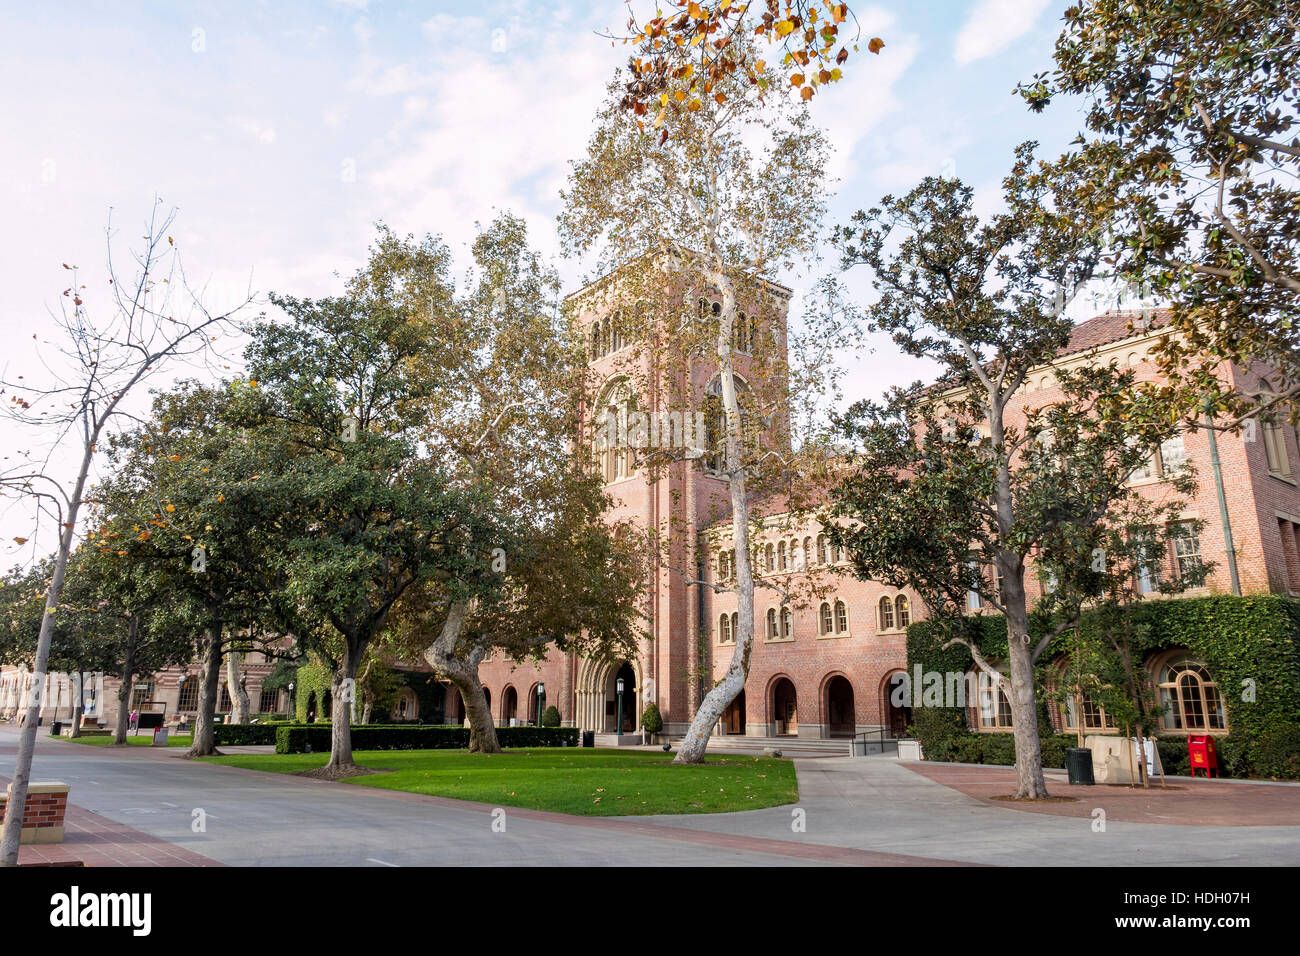 Los Angeles, DEC 9: Bovard Aministration, Auditorium of the University of Southern California on DEC 9, 2016 at Los Angeles Stock Photo